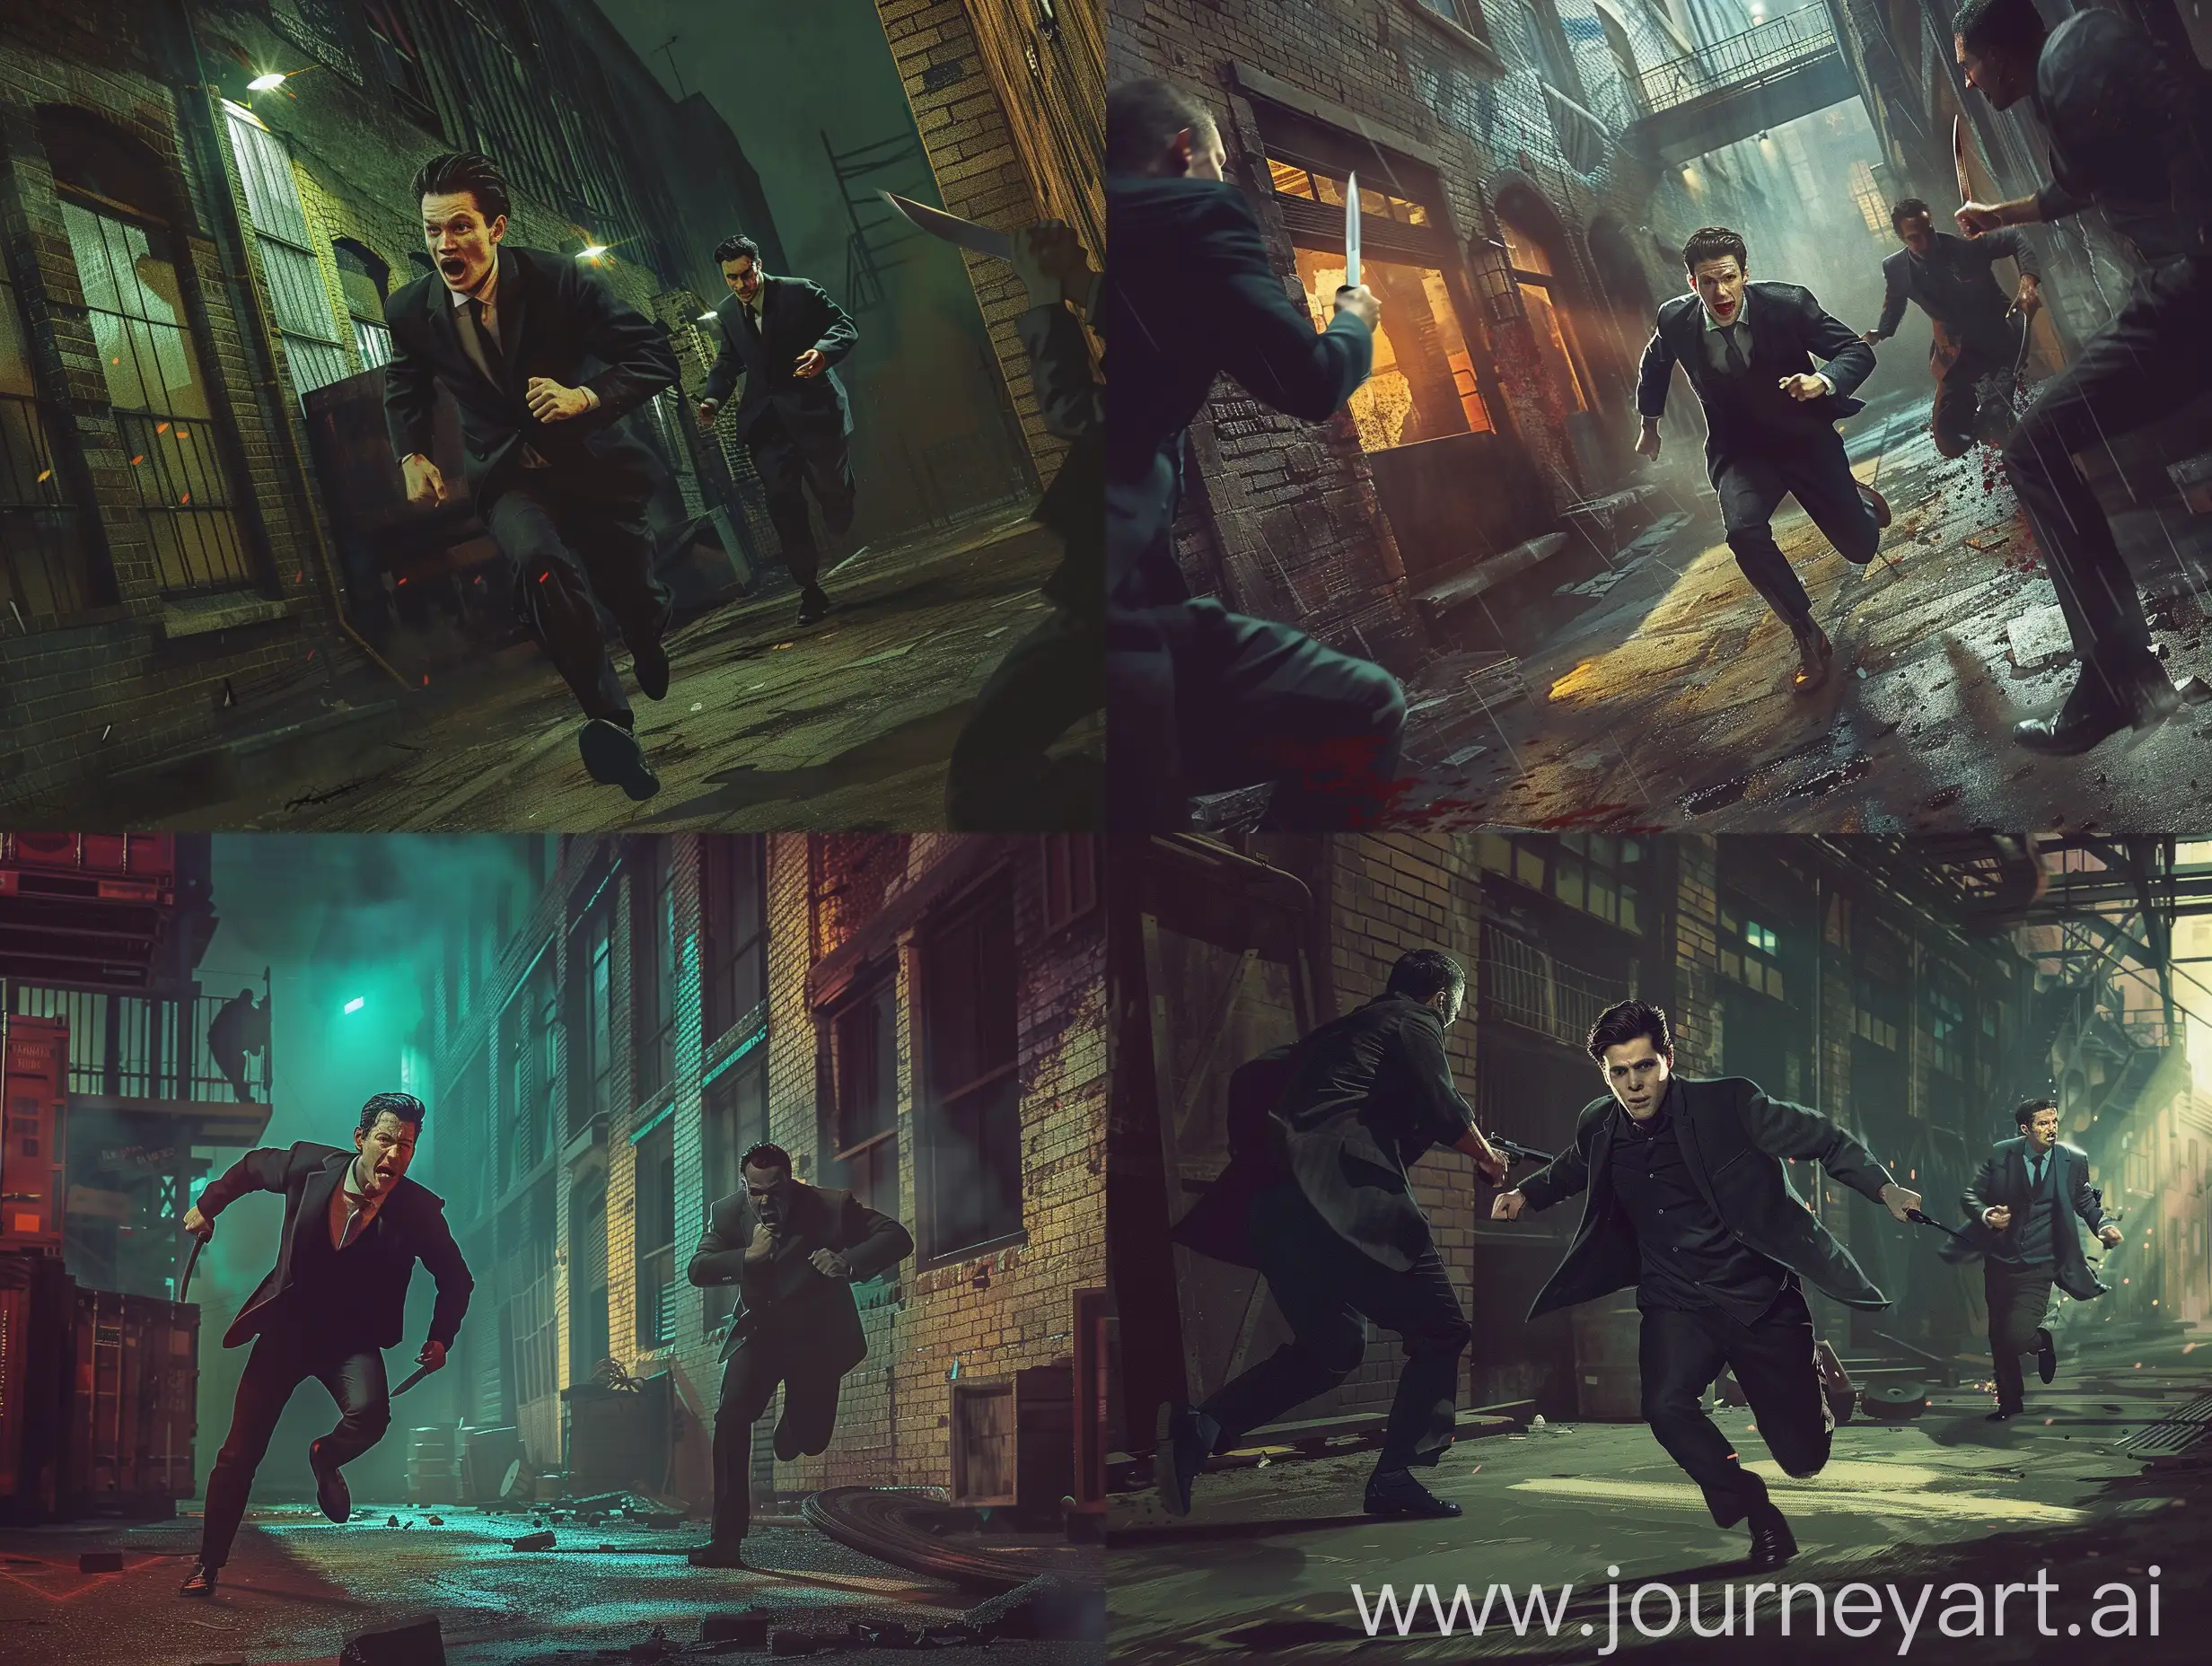 Terrified-Man-Running-from-Pursuing-Gangsters-in-Atmospheric-Alley